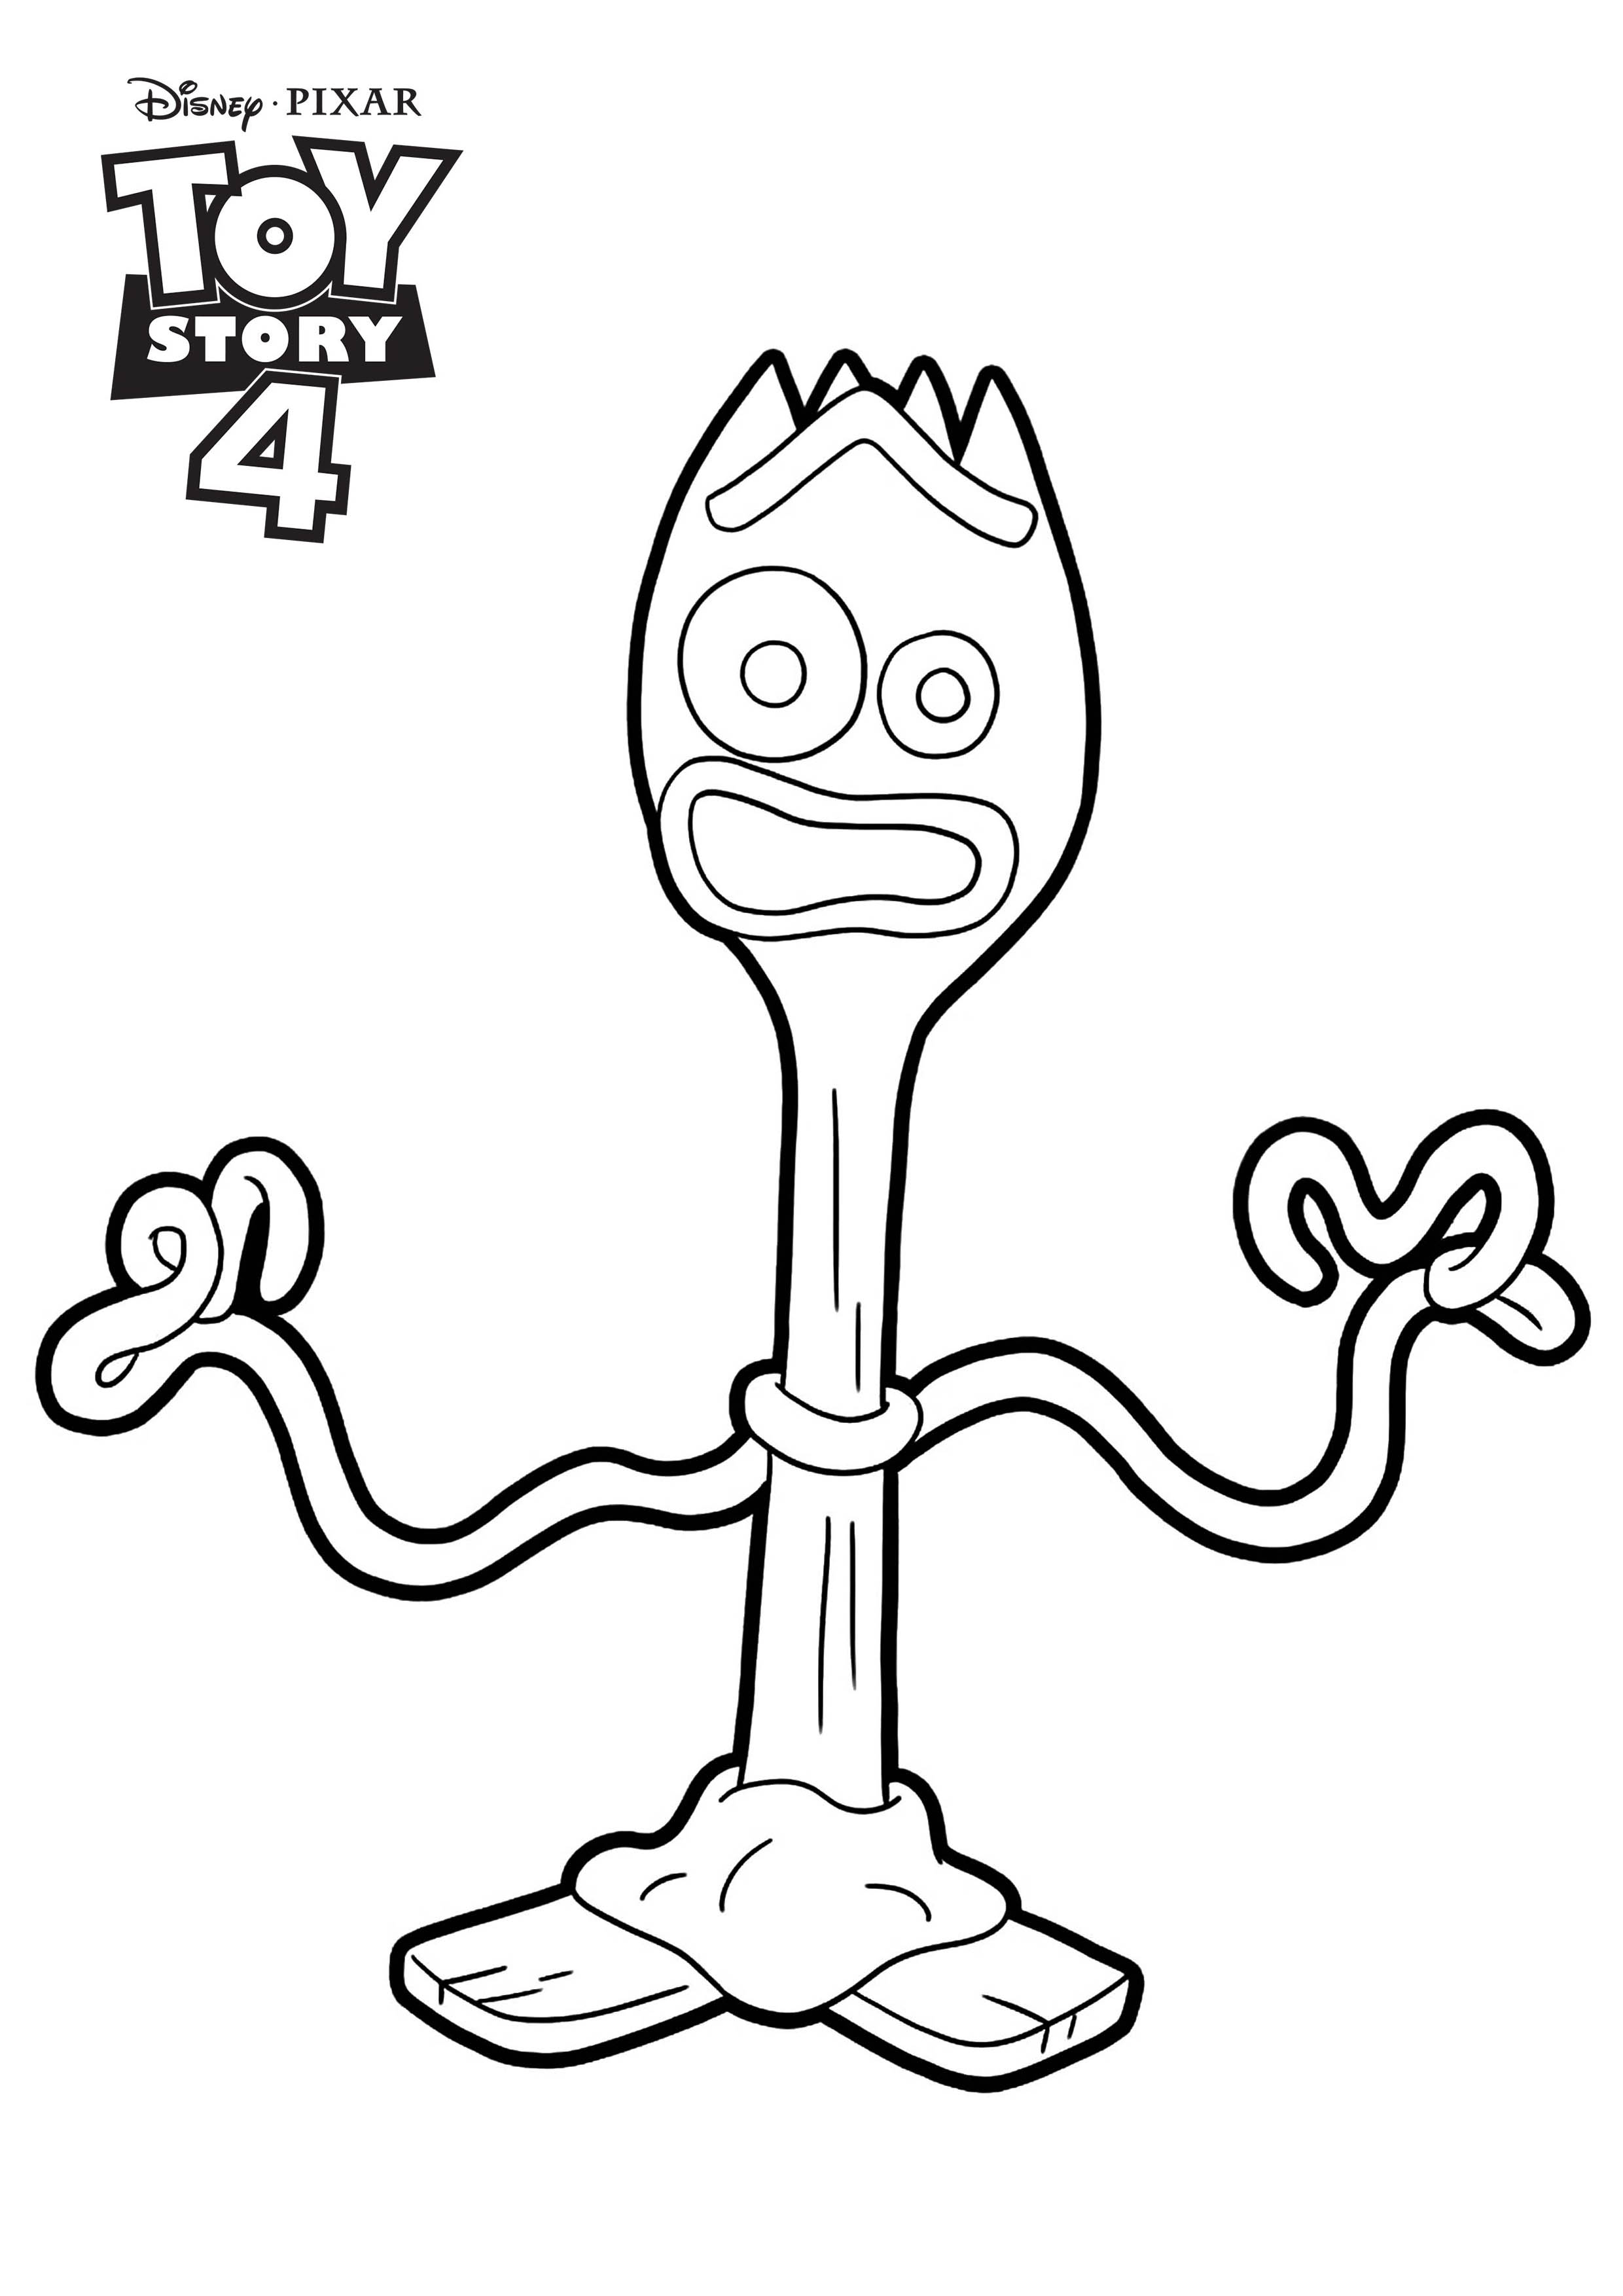 Beautiful Toy Story 4 coloring page to print and color : Forky